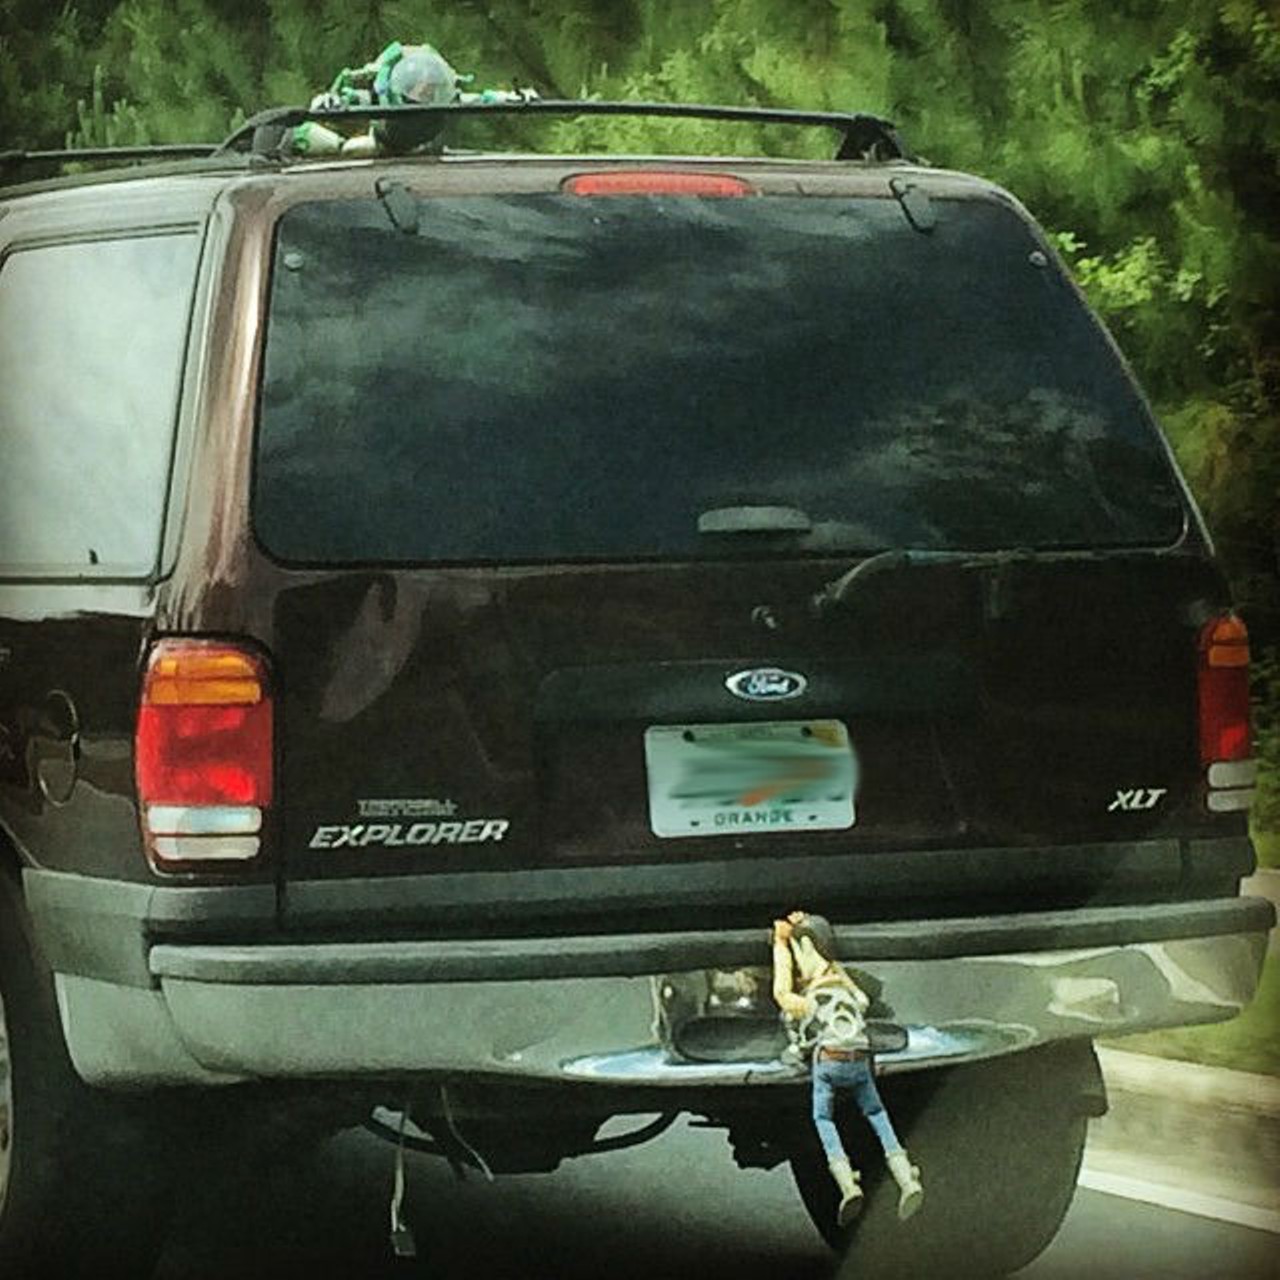 #onlyinorlando would Woody be haning on for dear life.  Instagram: laceymatherne